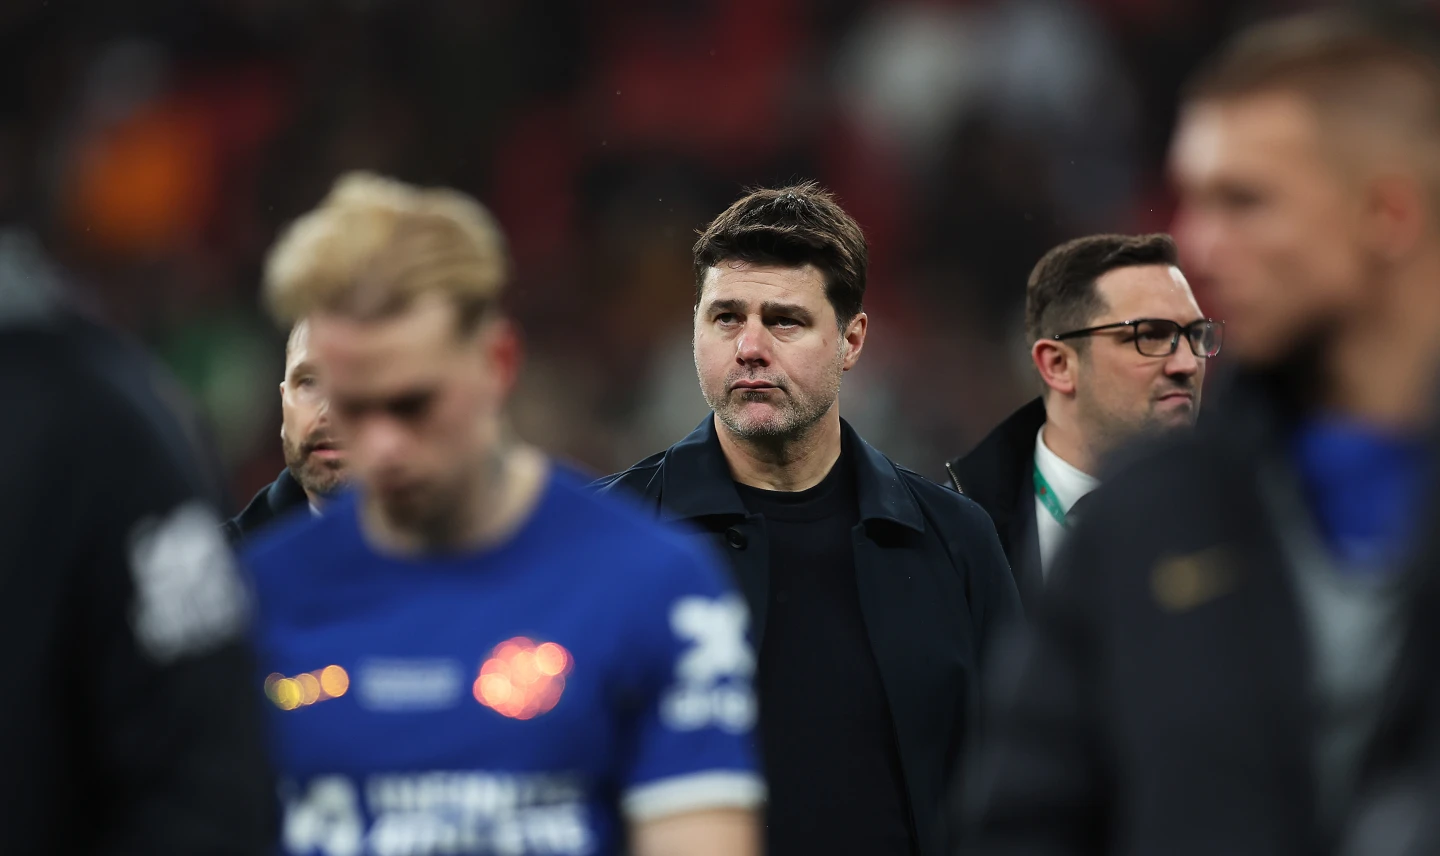 Chelsea's Poor Transfer Recruitment Blamed for Carabao Cup Final Loss